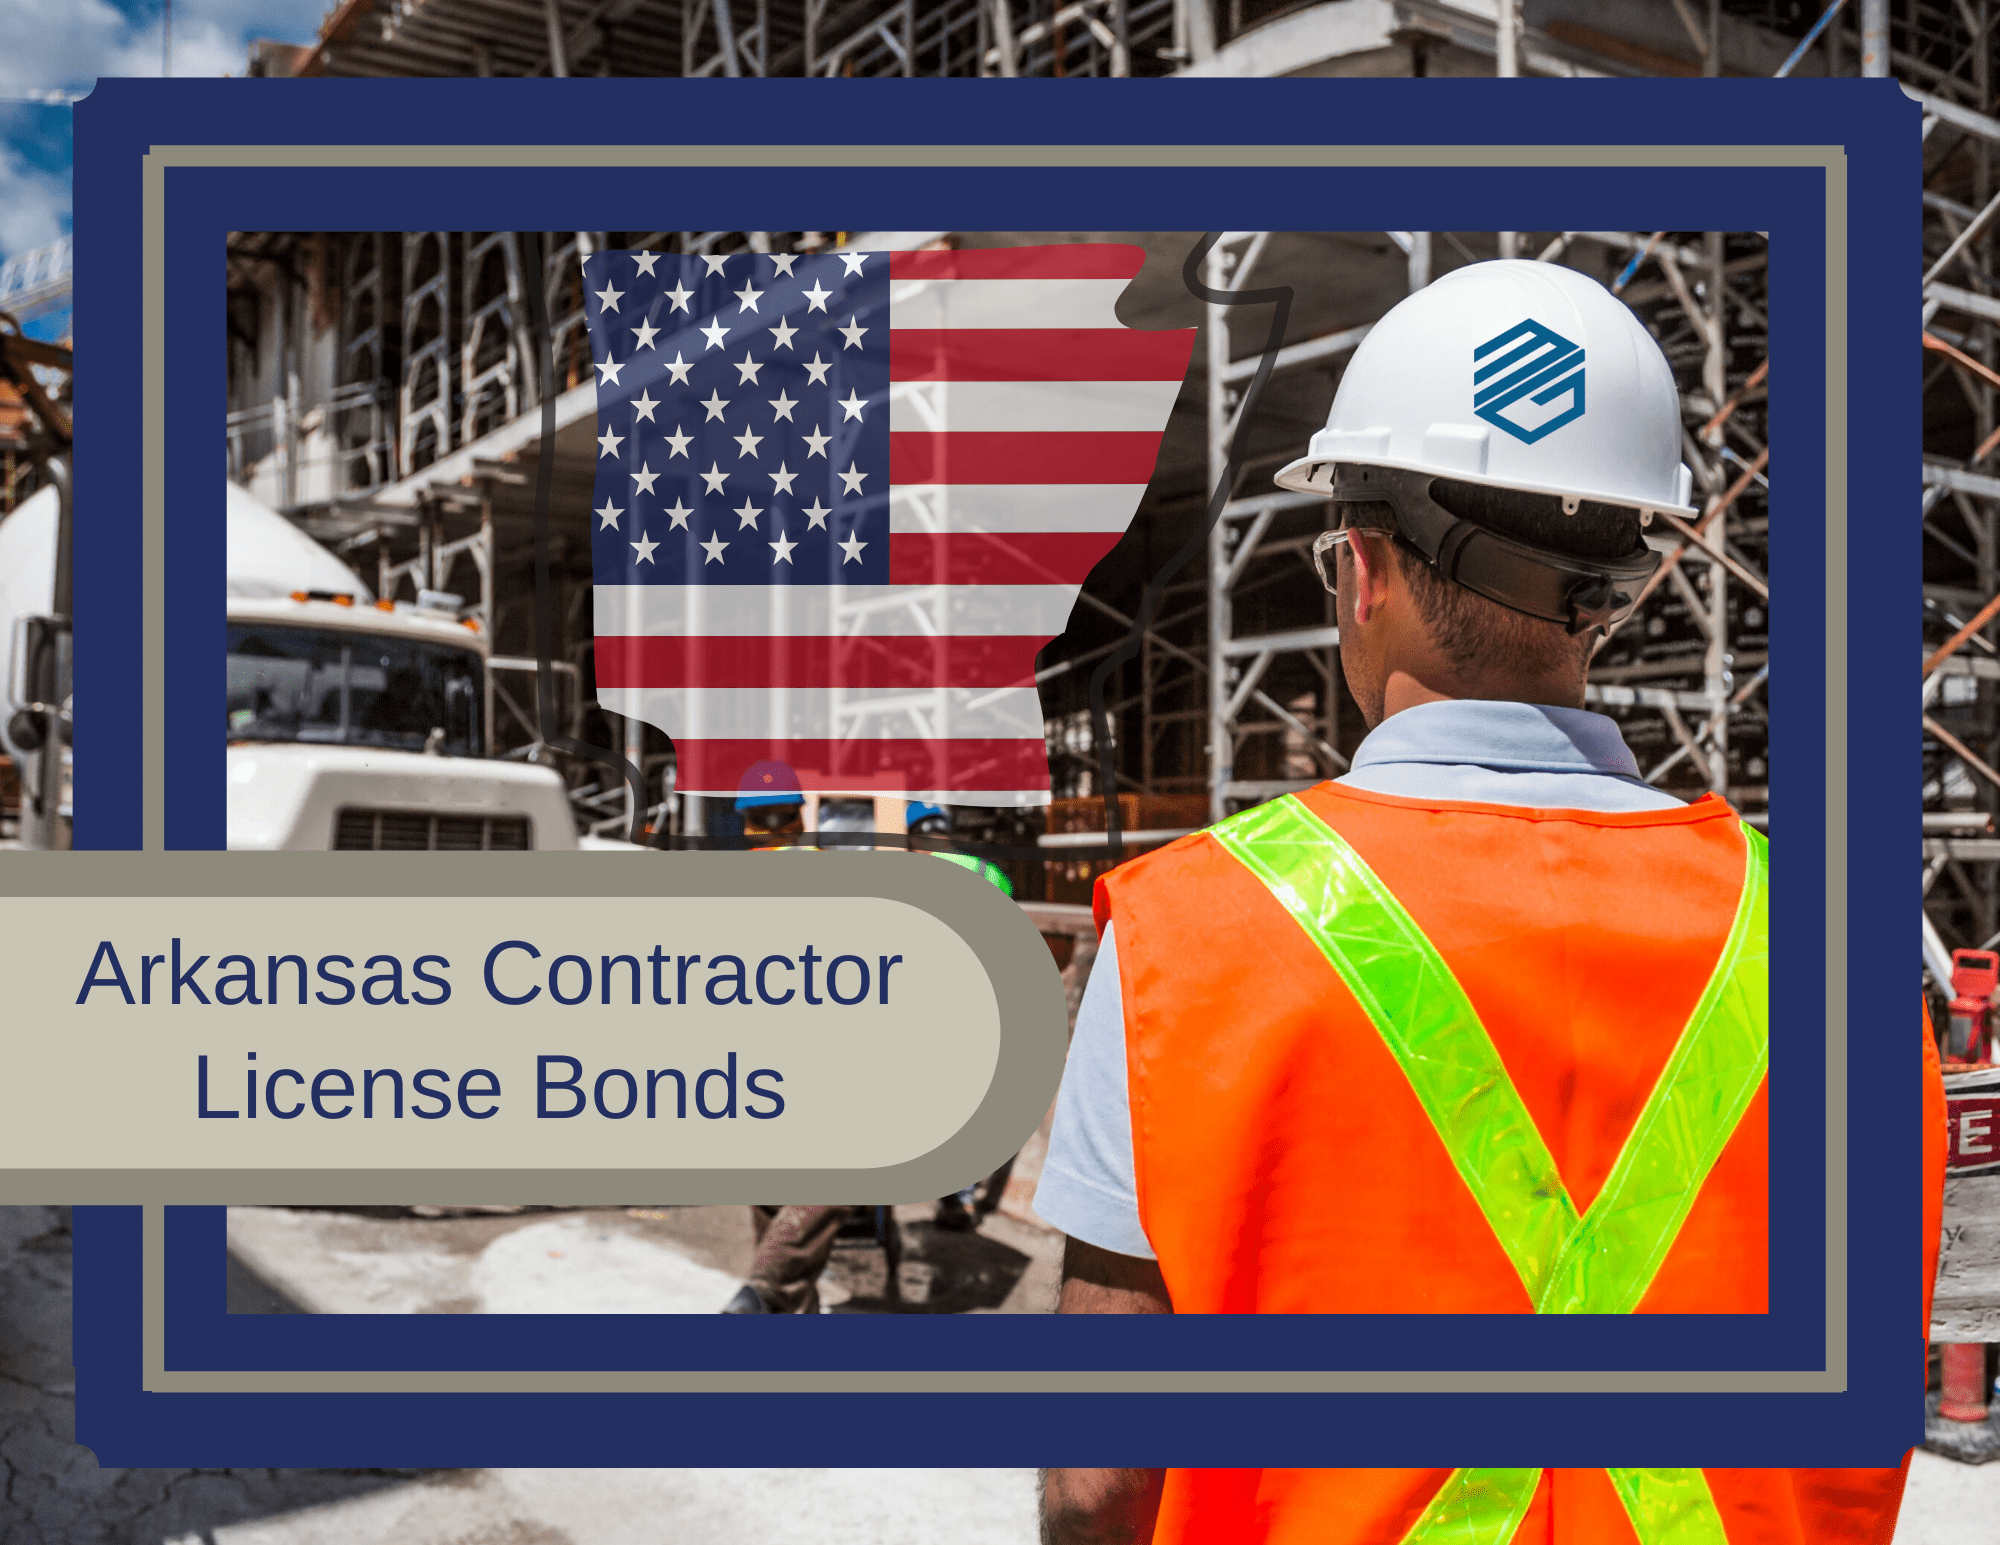 Arkansas Contractor License Bonds - A construction job site in the background. A large state of Arkansas in the middle with the U.S. Flag in the state. Words Arkansas Contractor License Bond below.